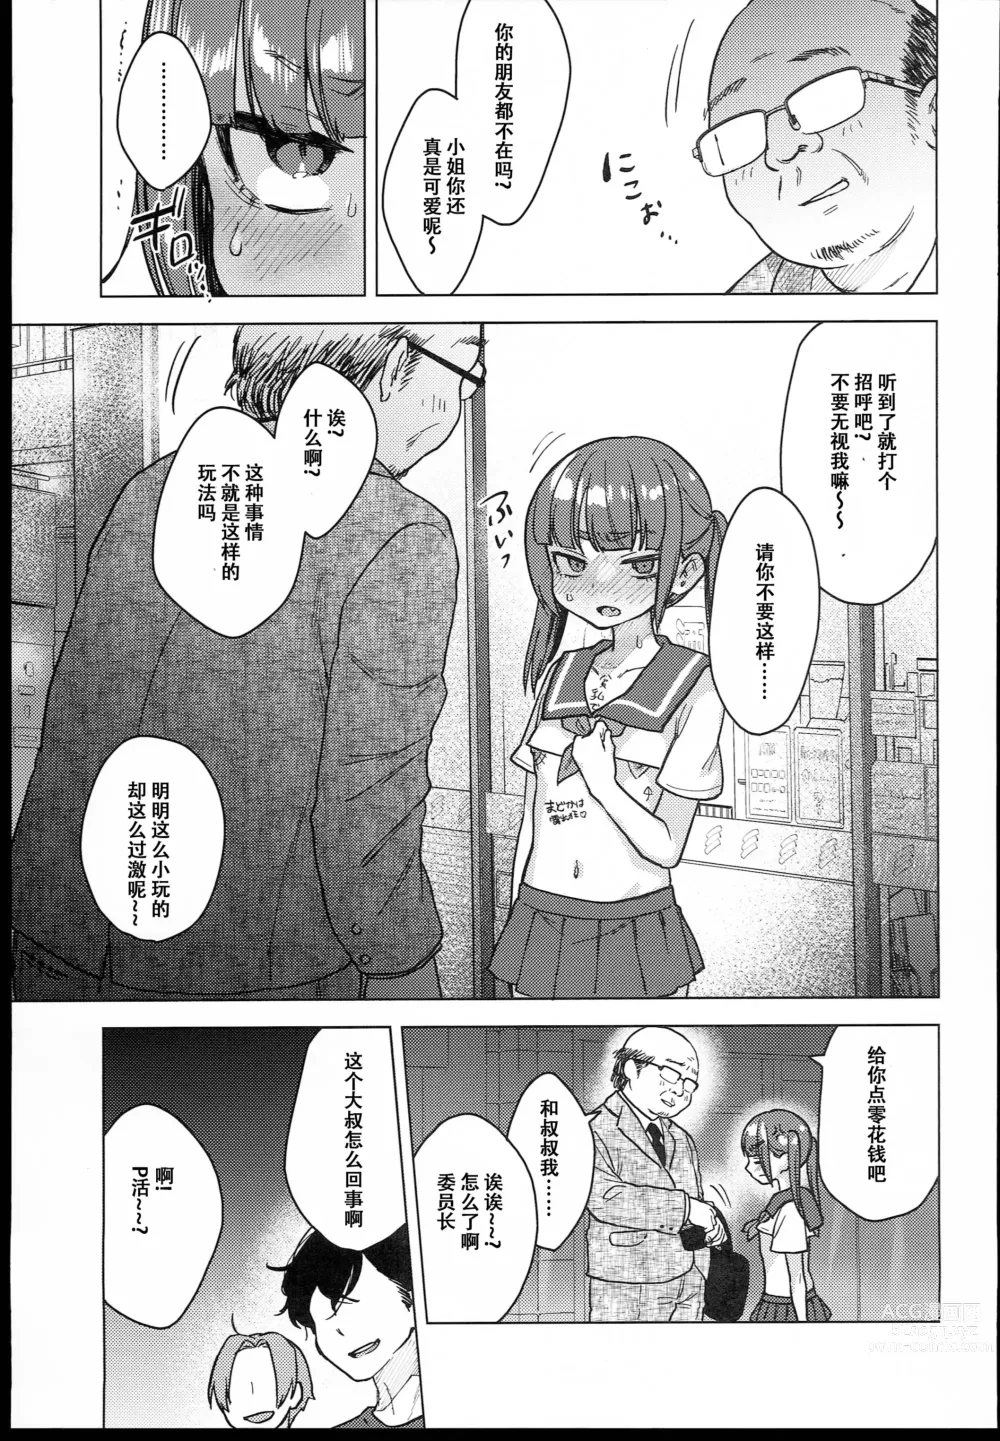 Page 19 of doujinshi 委員長は今日からみんなのオモチャ～終わった学校生活編～